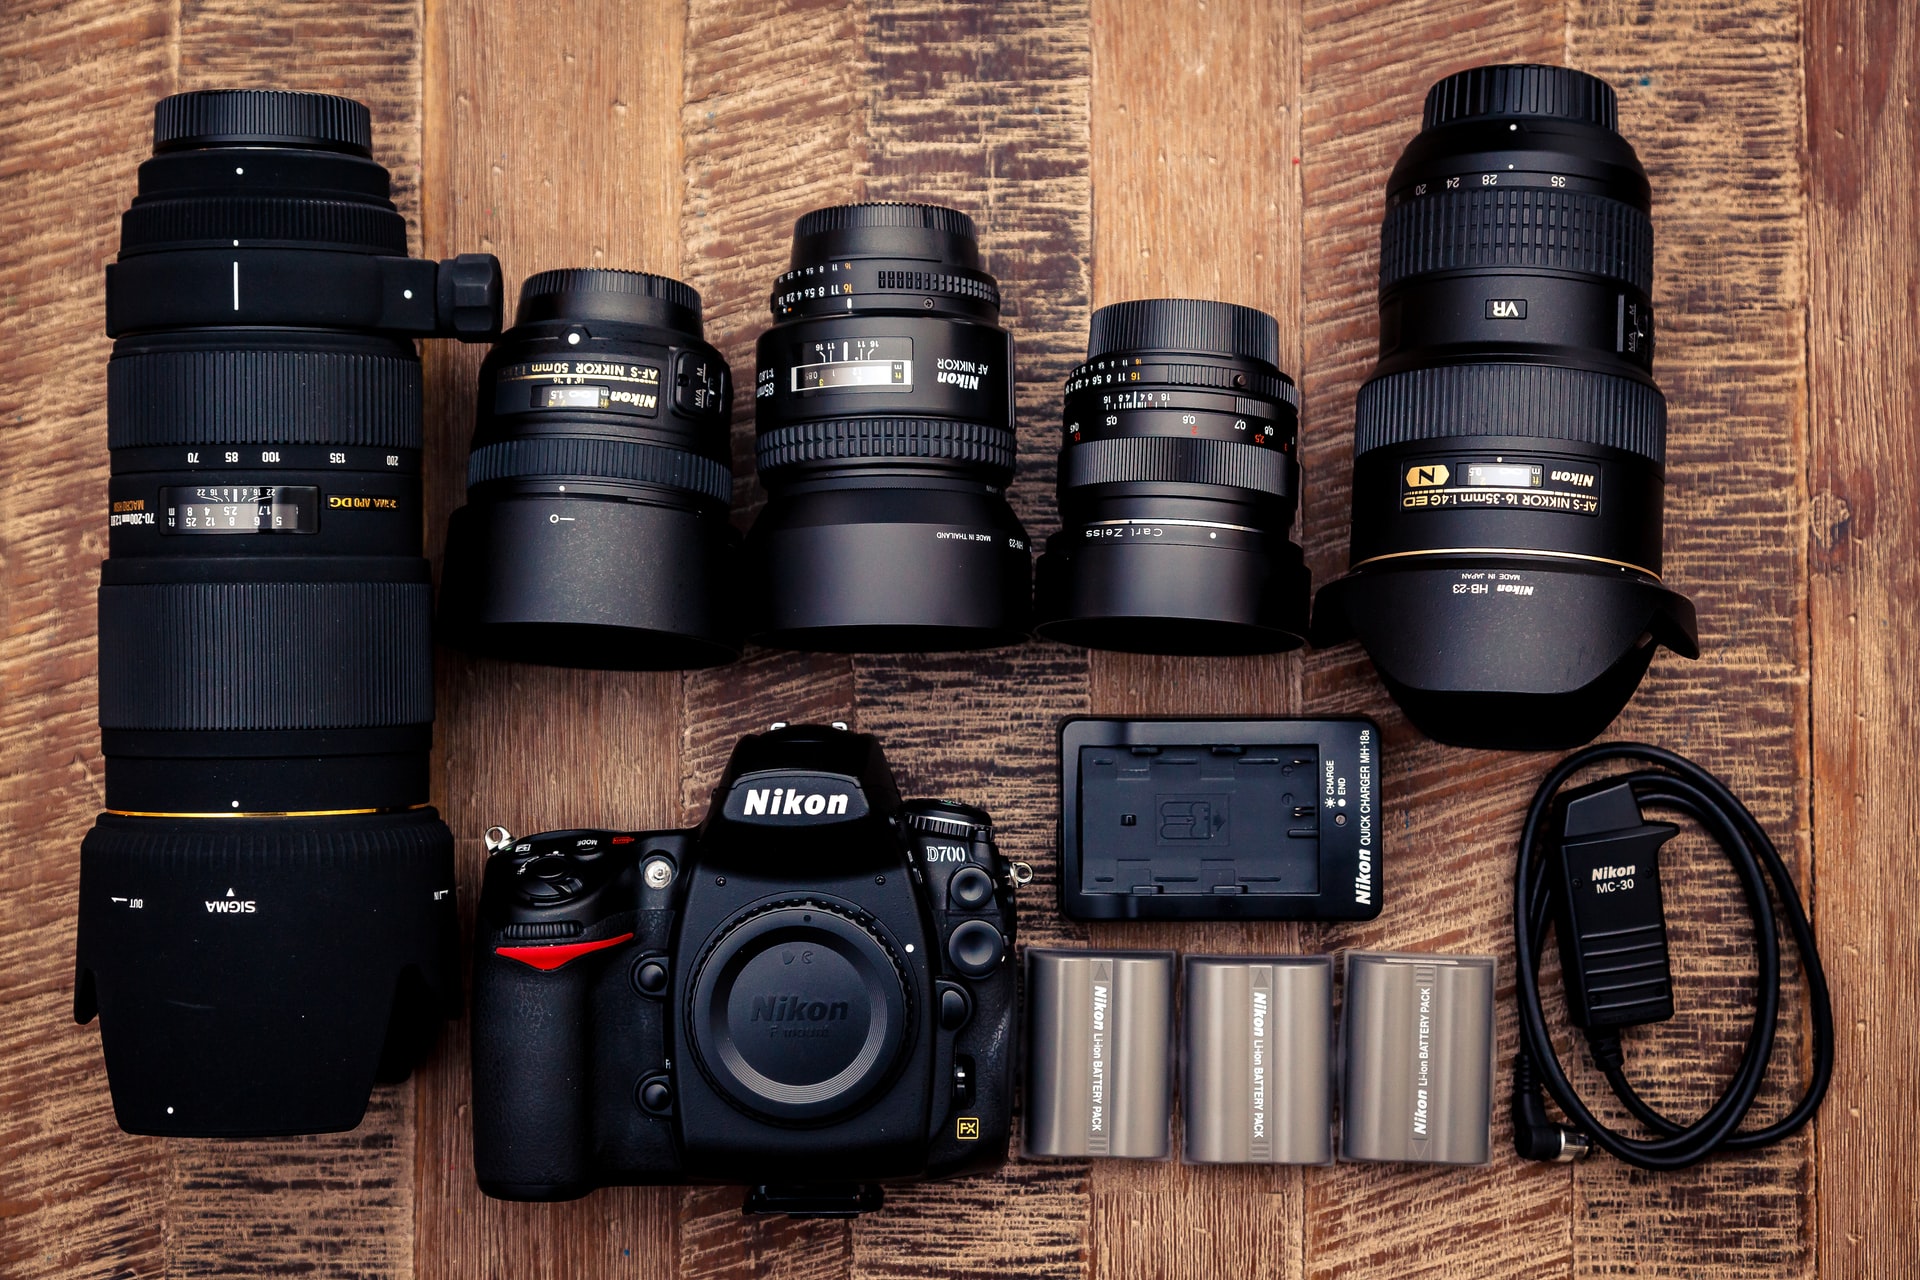 Beginners Guide to Essential Camera Gear